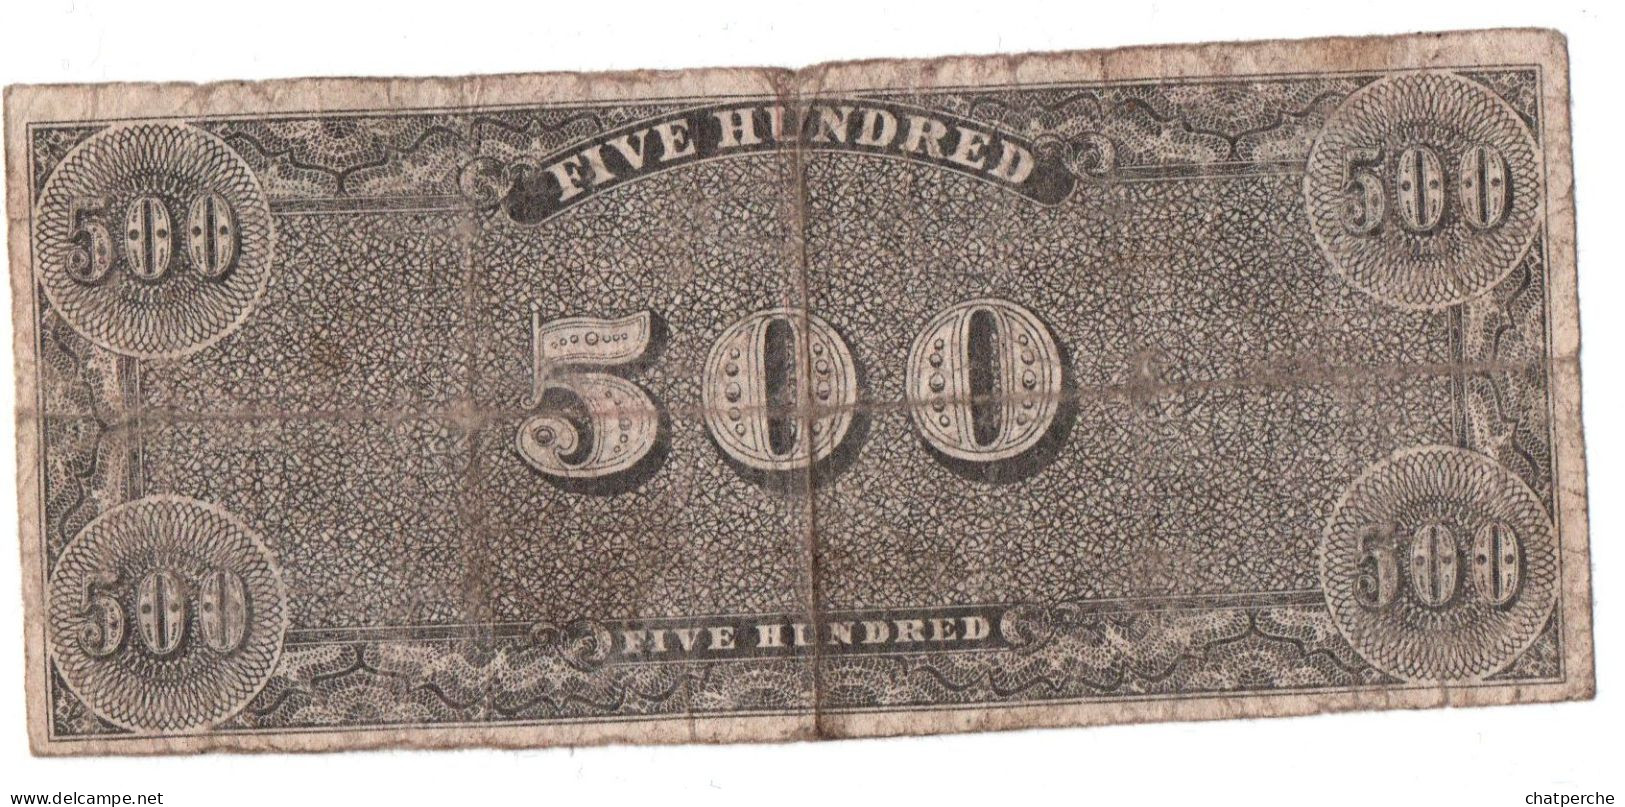 POUR COLLECTIONNEUR FAUX-BILLET FAKE 500 FIVE HUNDRED DOLLARS THE CONFEDERATE UNITED STATES OF AMERICA - Colecciones Lotes Mixtos